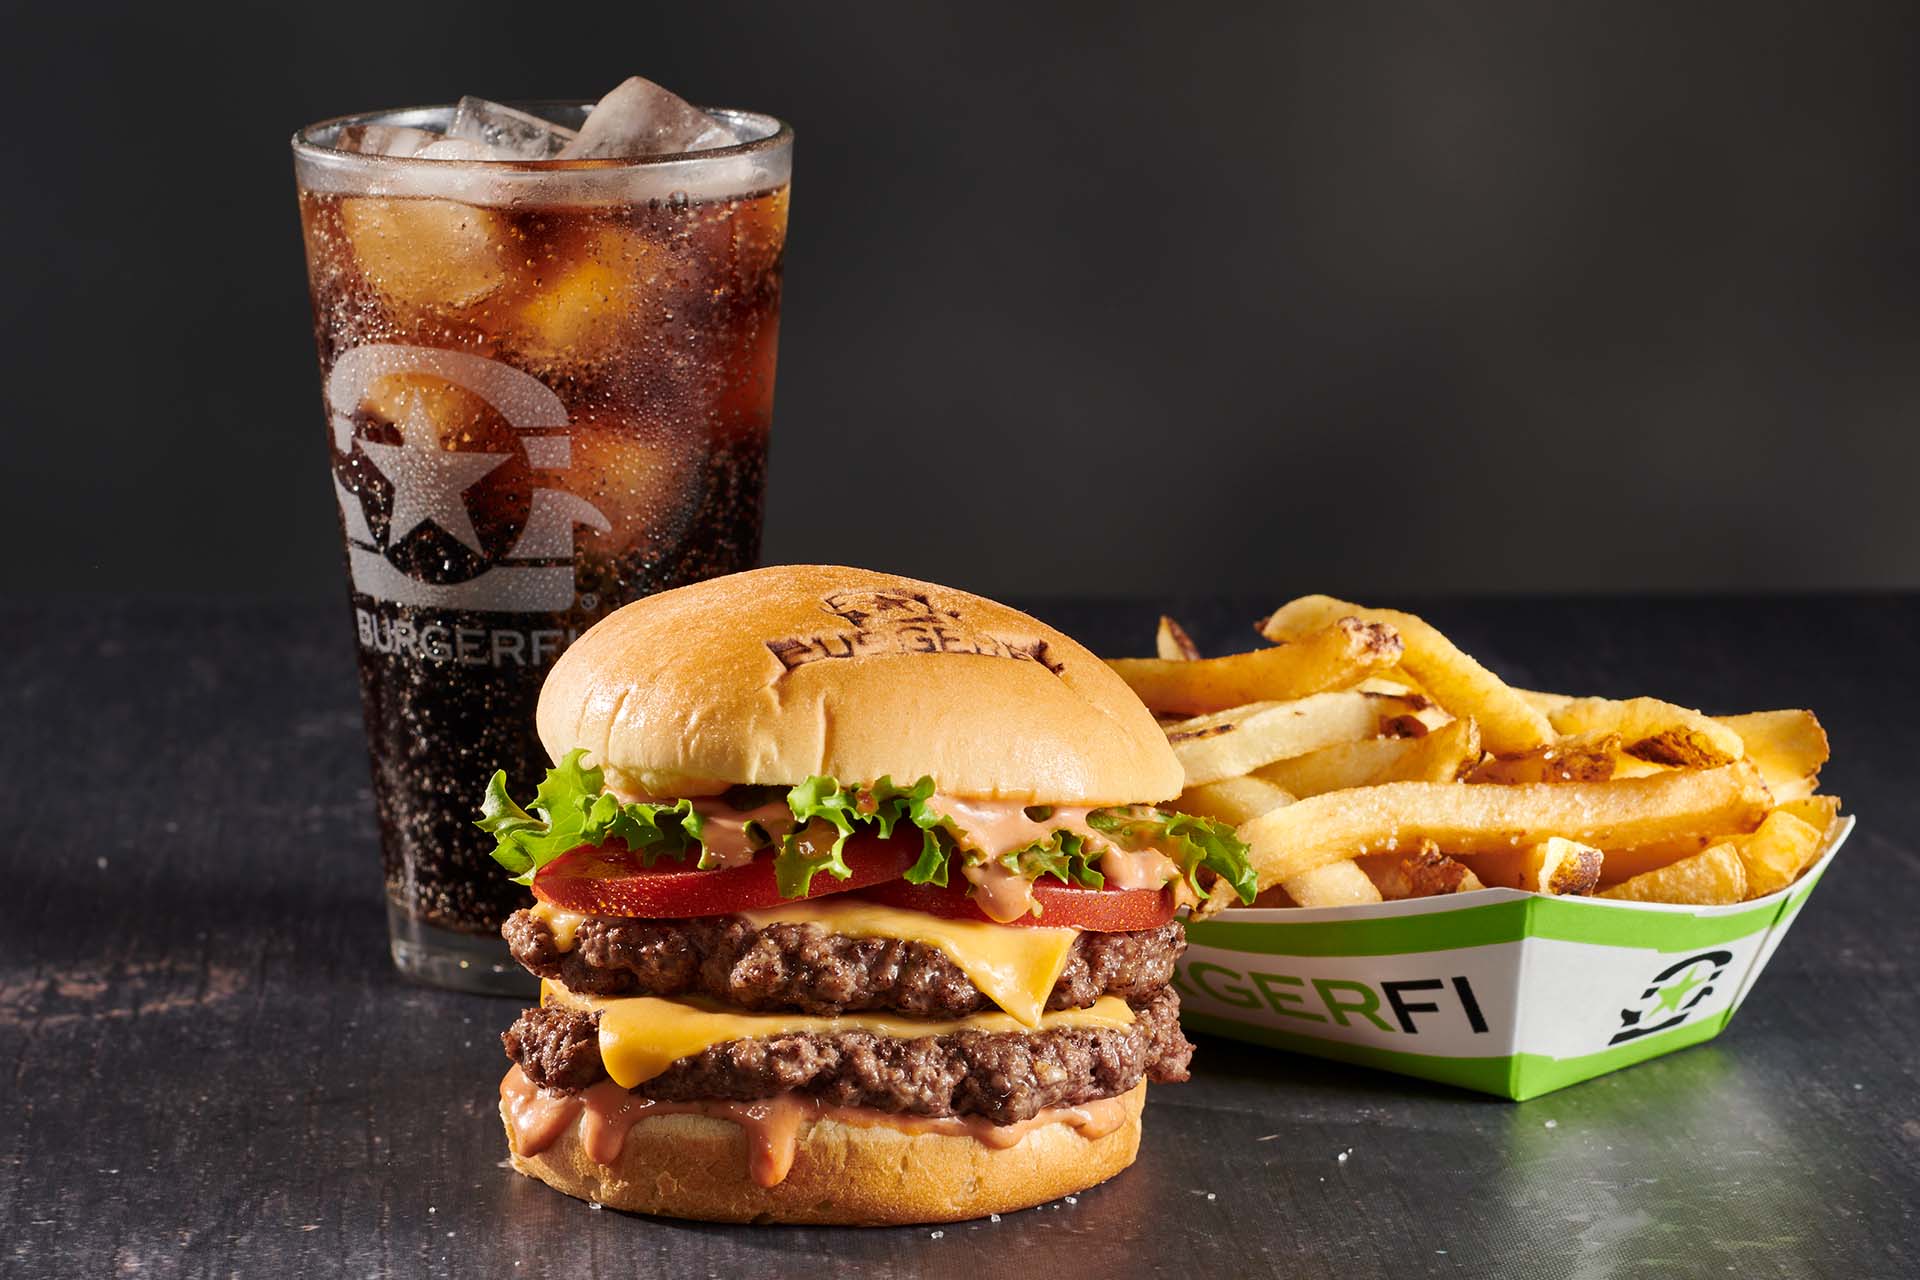 BurgerFi cheeseburger combo with fries and a cola